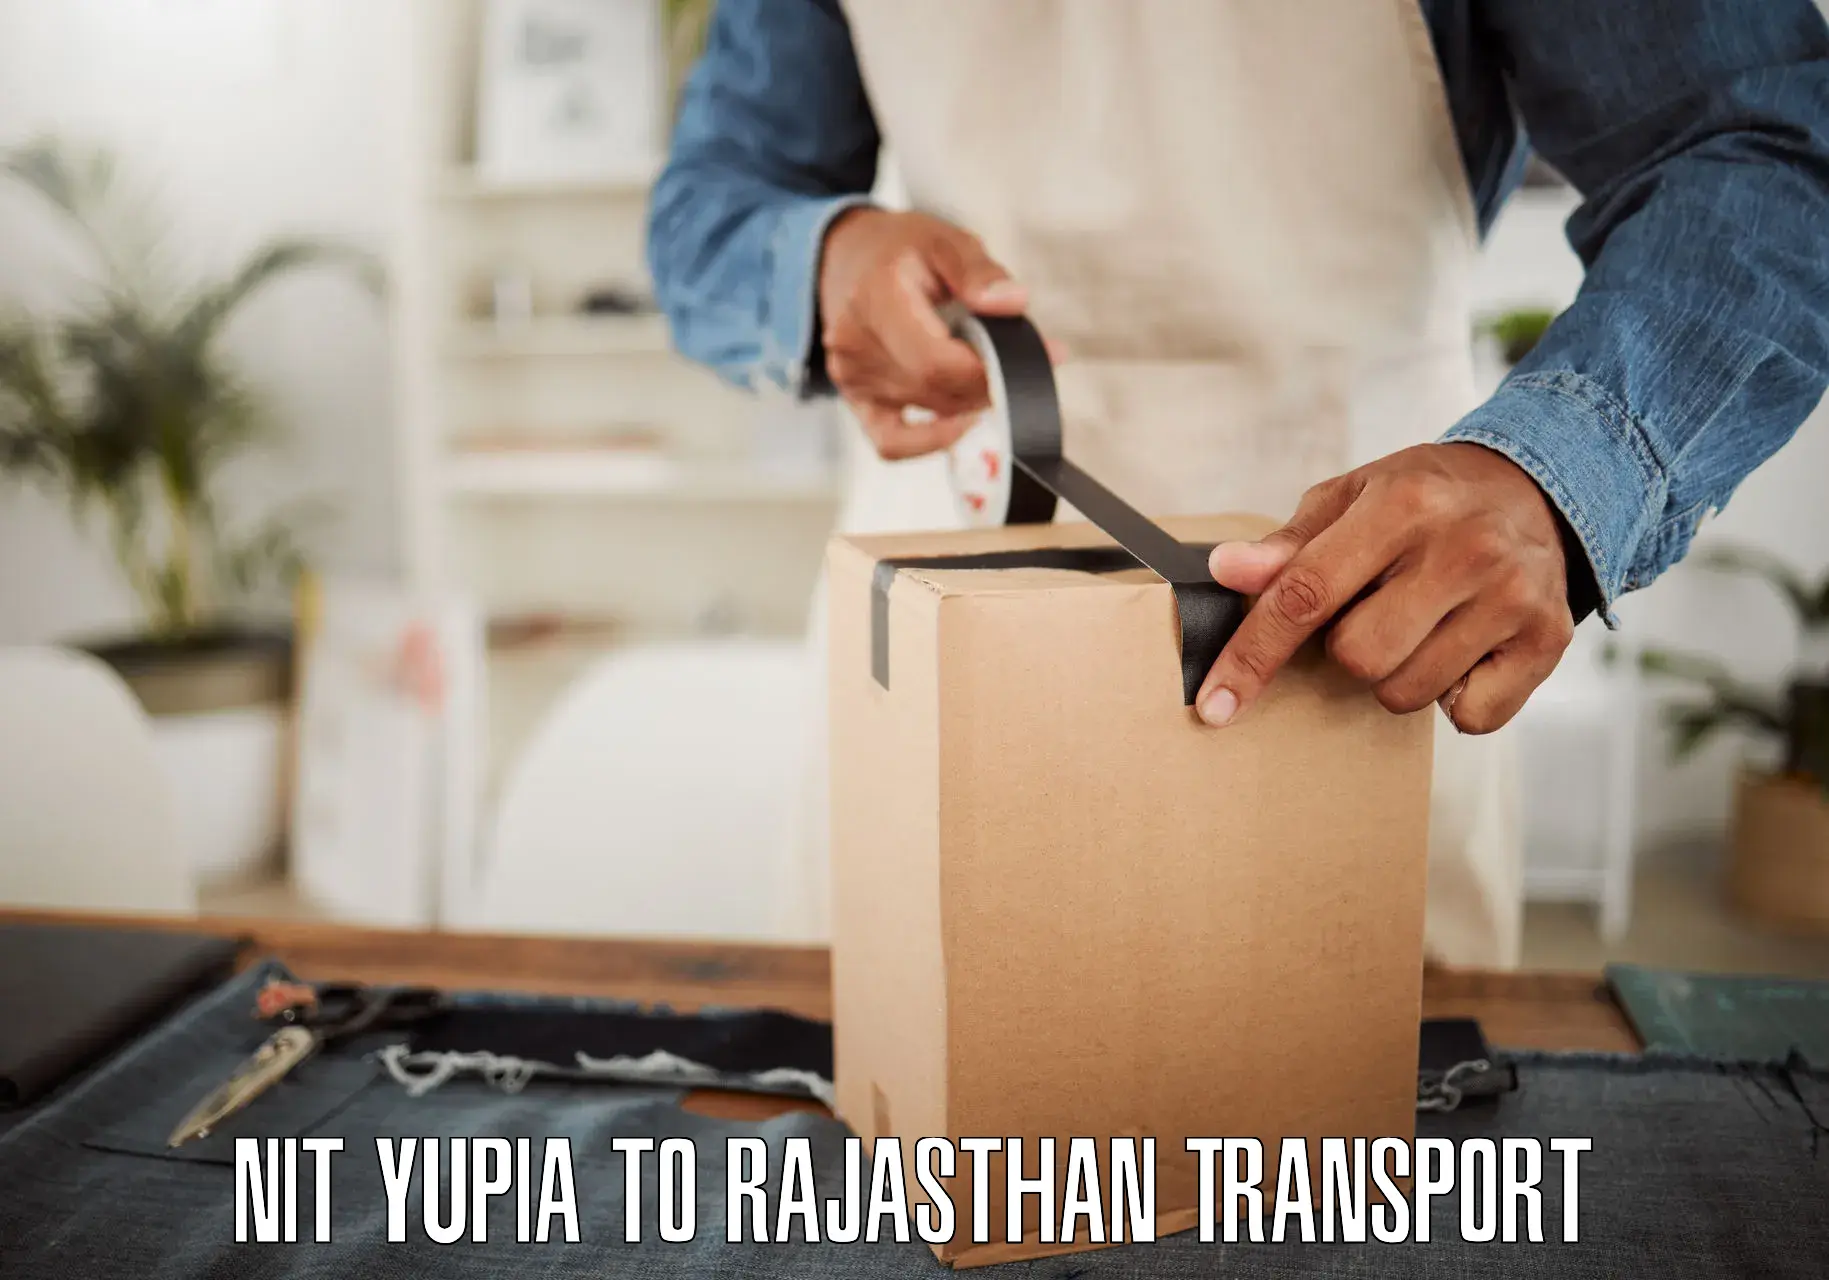 Delivery service NIT Yupia to Bajore